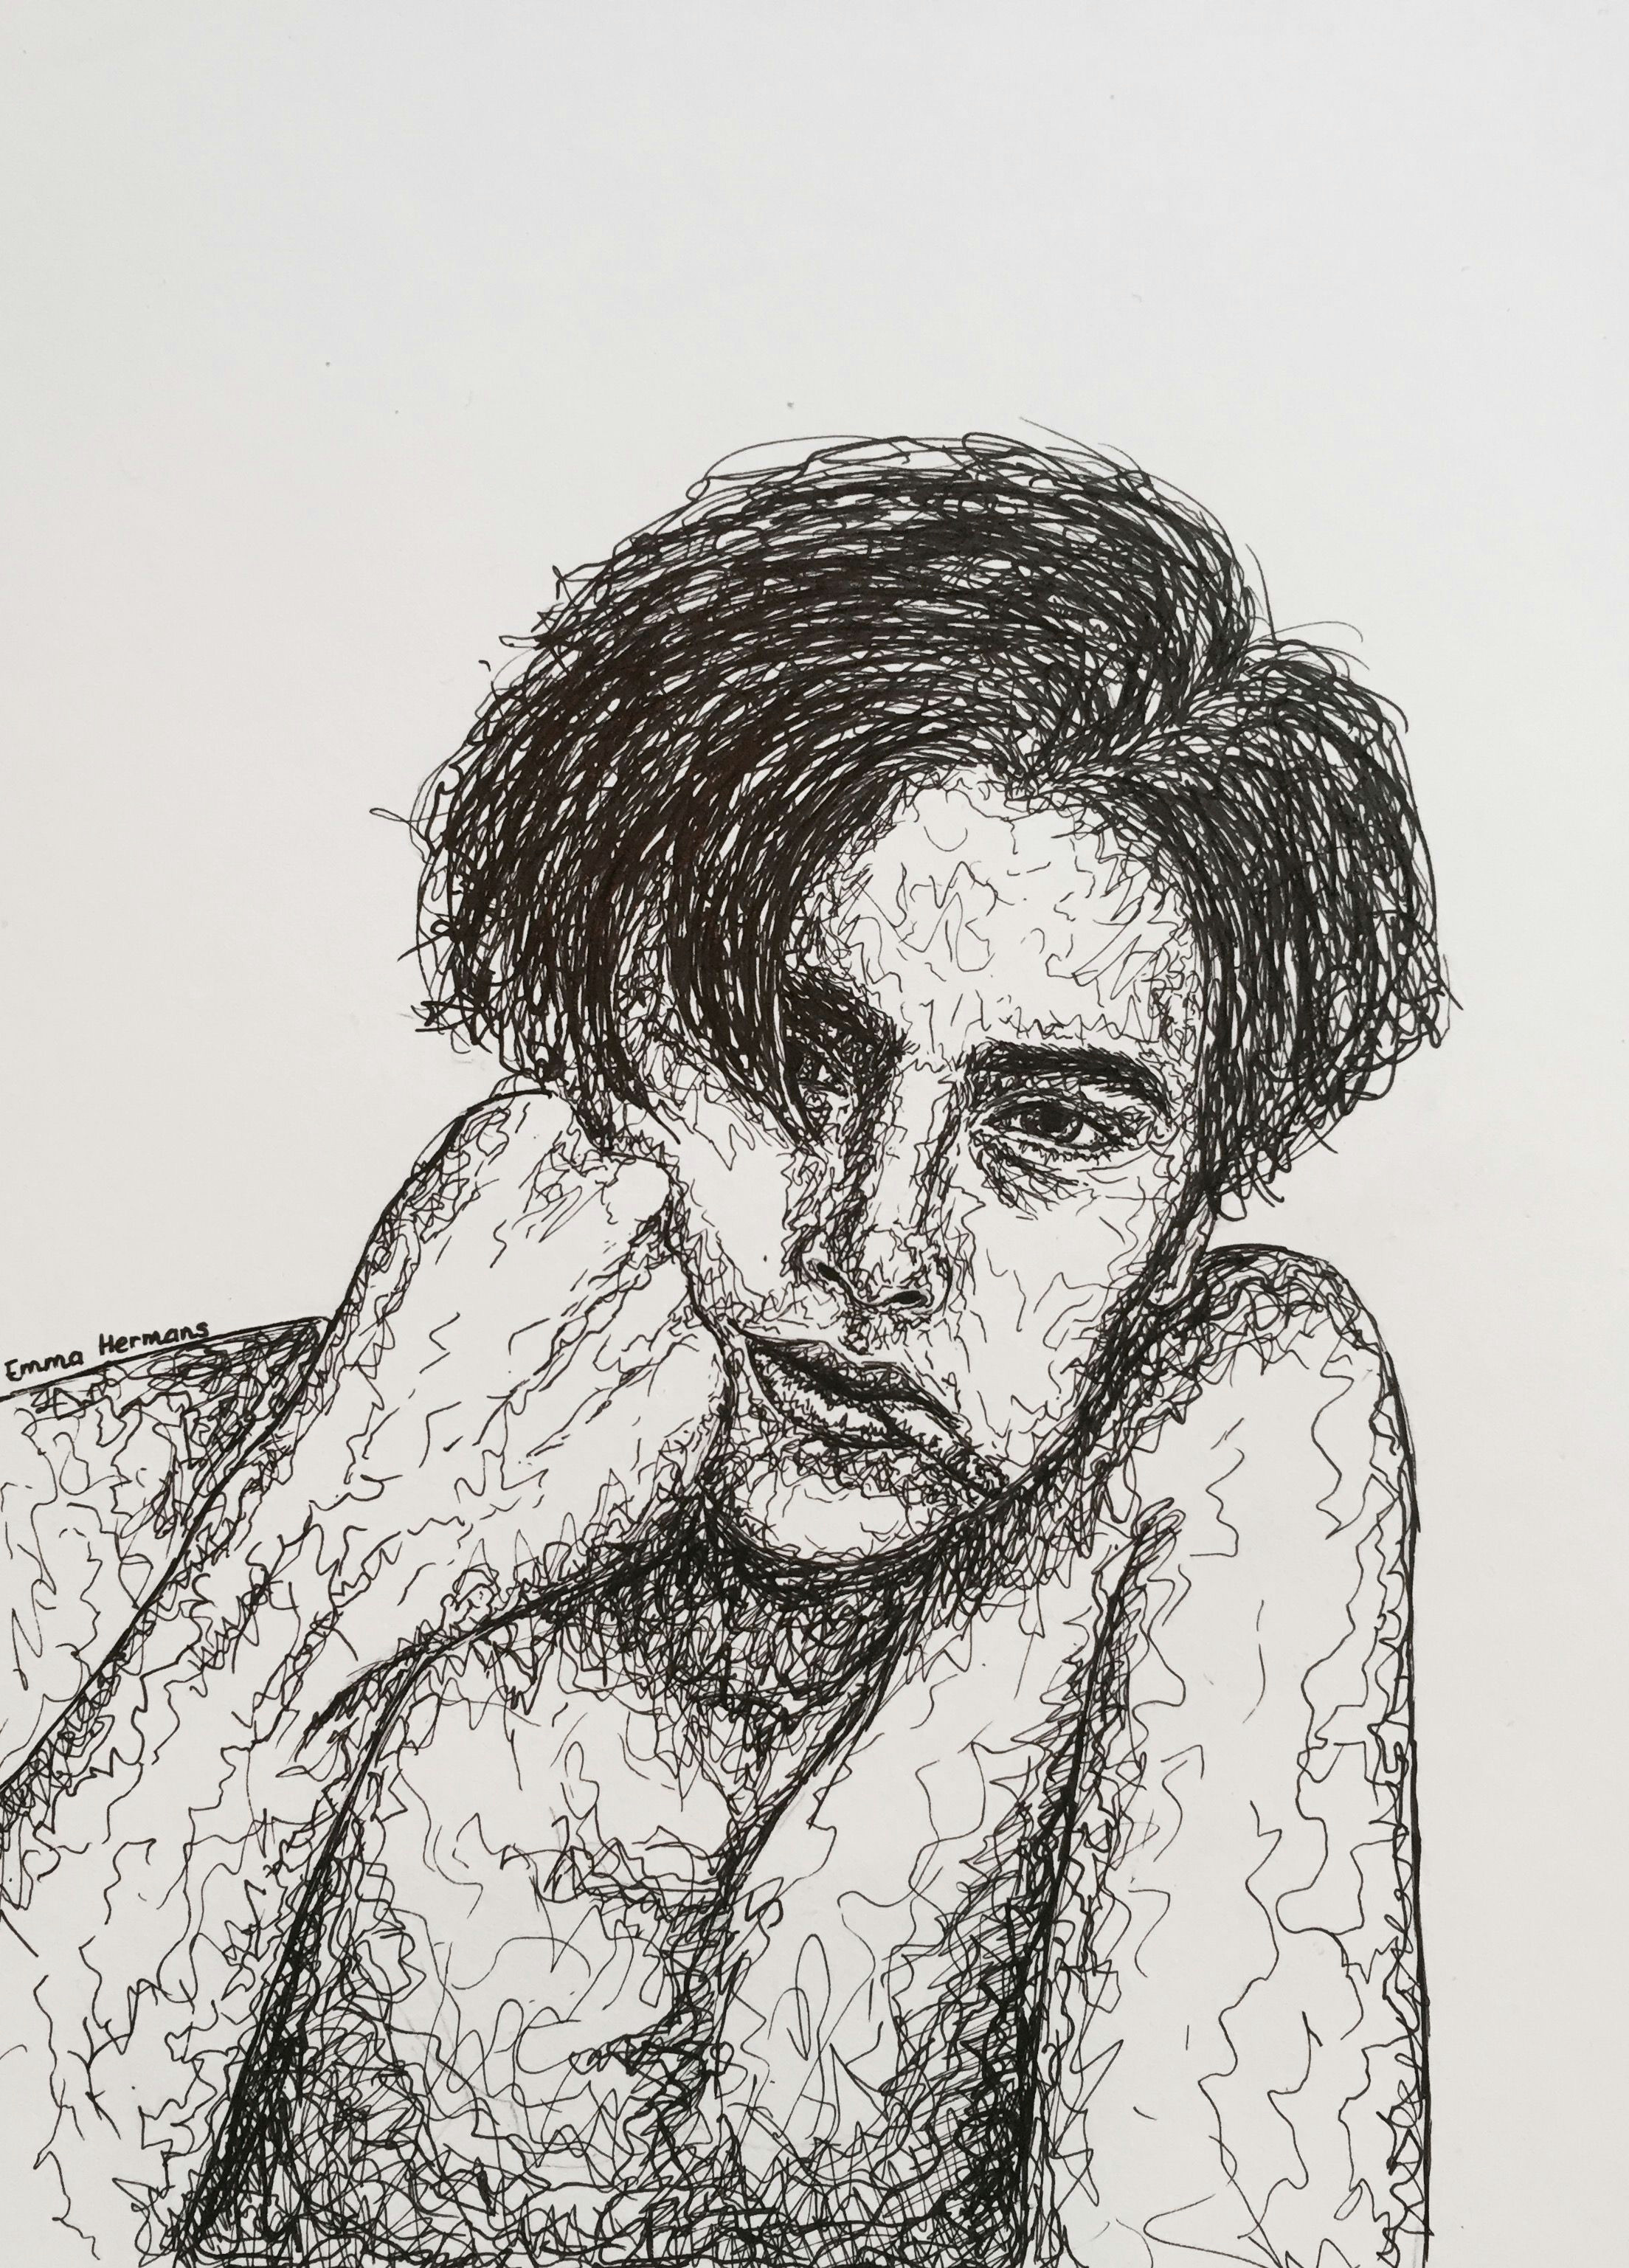 pendrawing of cole sprouse art artwork pen drawing pendrawing cole sprouse